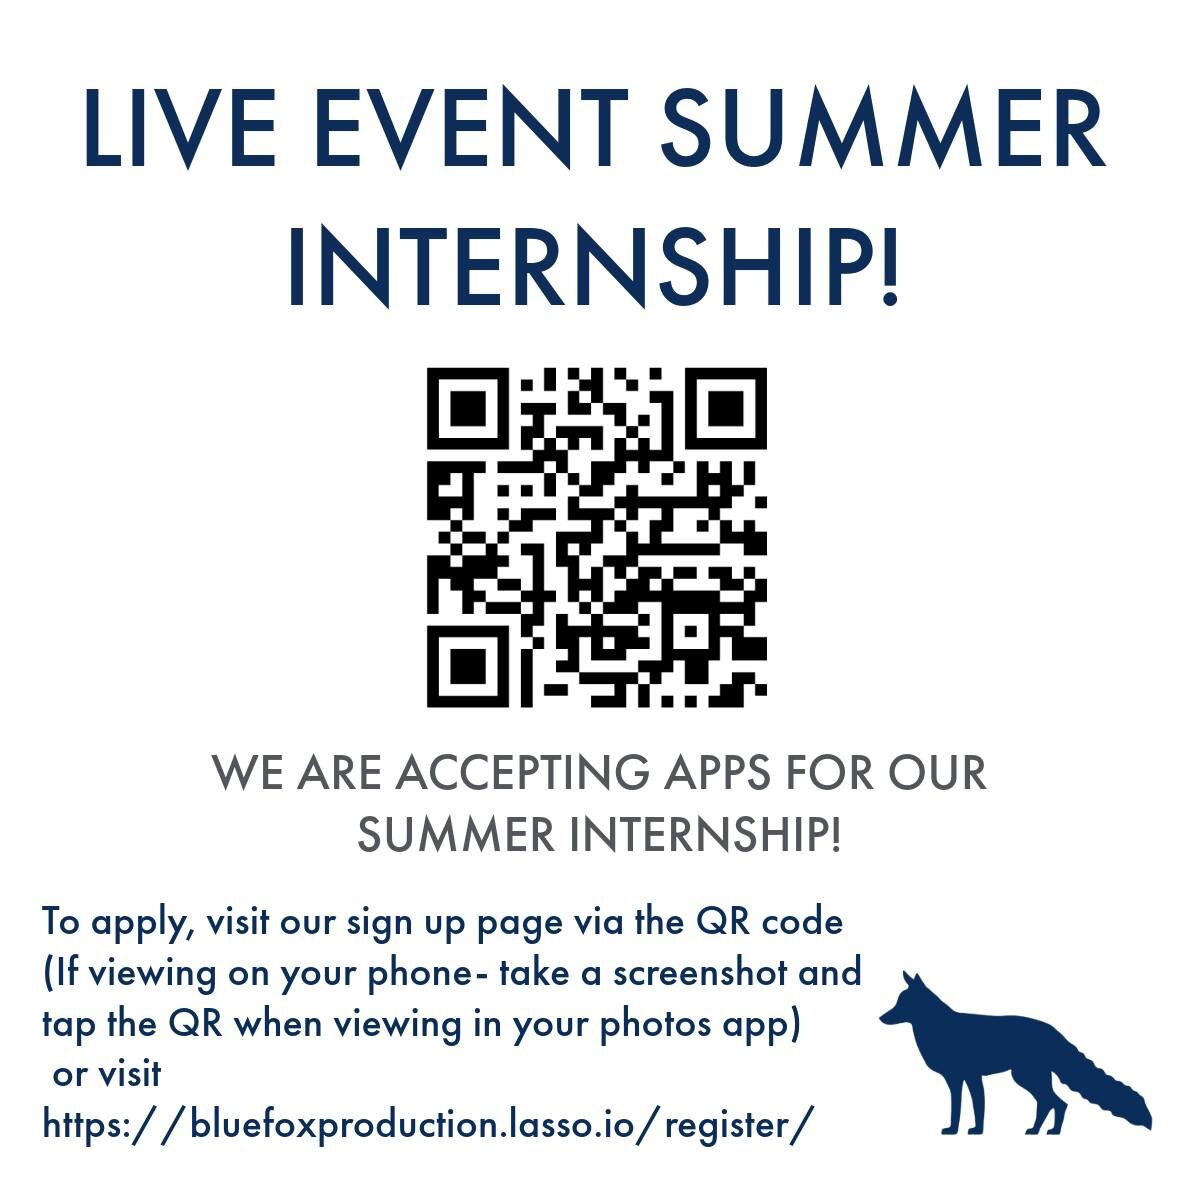 Want to learn more about the audio visual tech behind live events? We&rsquo;re taking applications for our summer live event internship! This is a paid opportunity to work within the live event industry and learn all things audio, lighting, and video